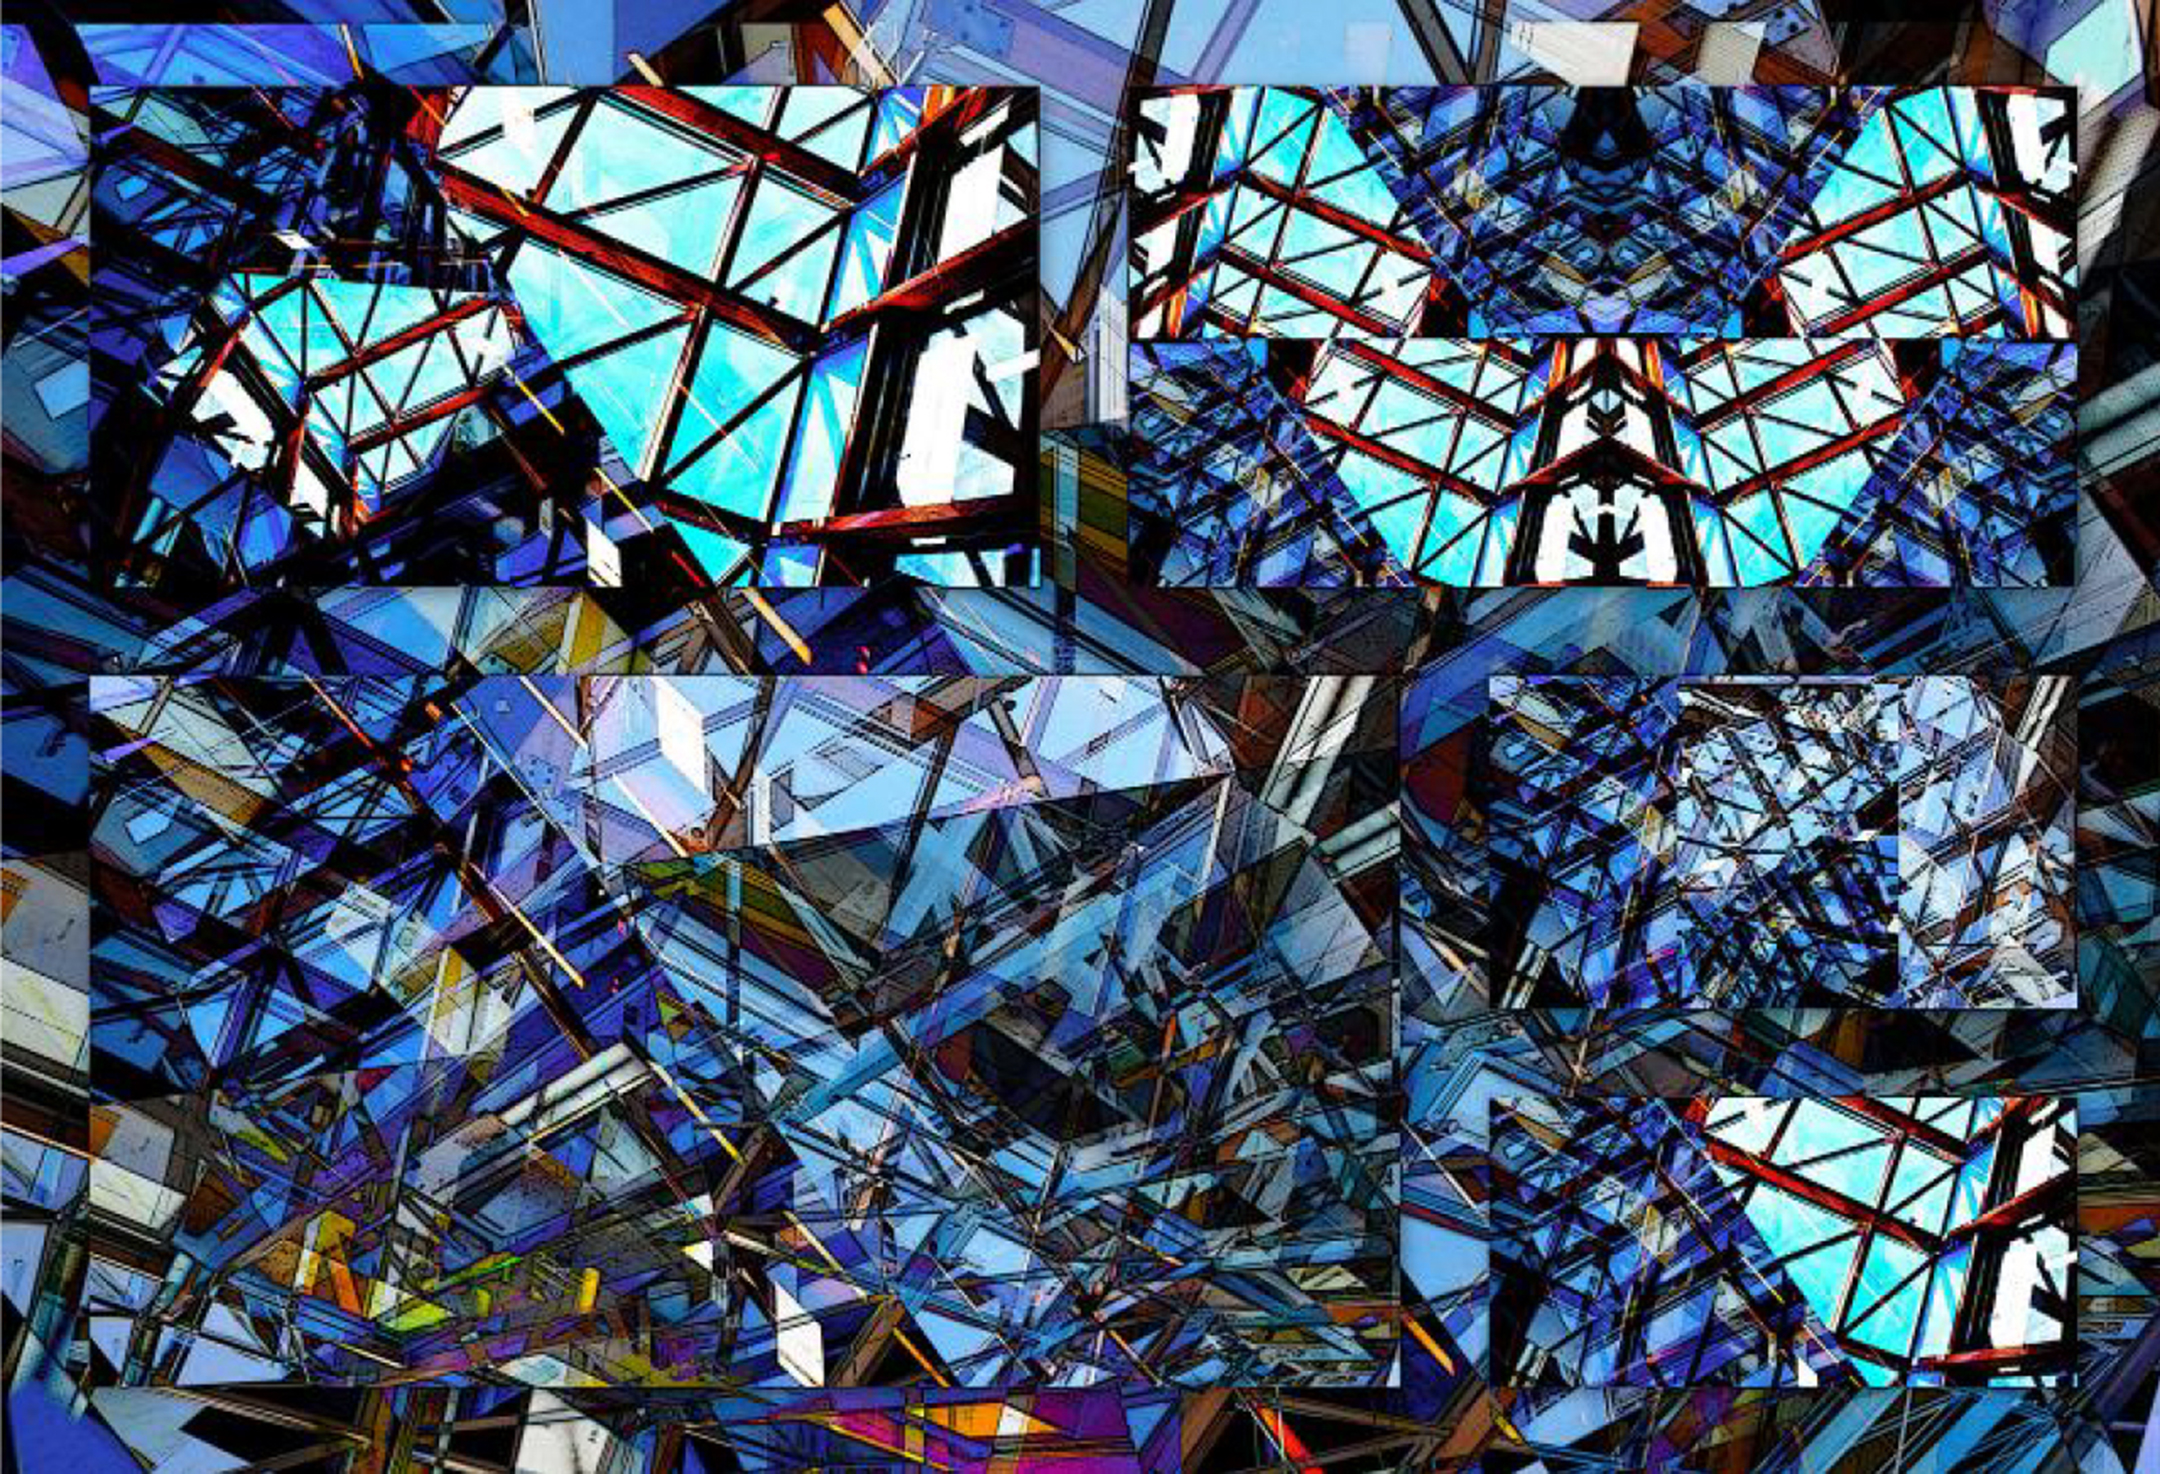 A series of images of a glass ceiling overlayed on each other to create a kaleidoscopic sensation